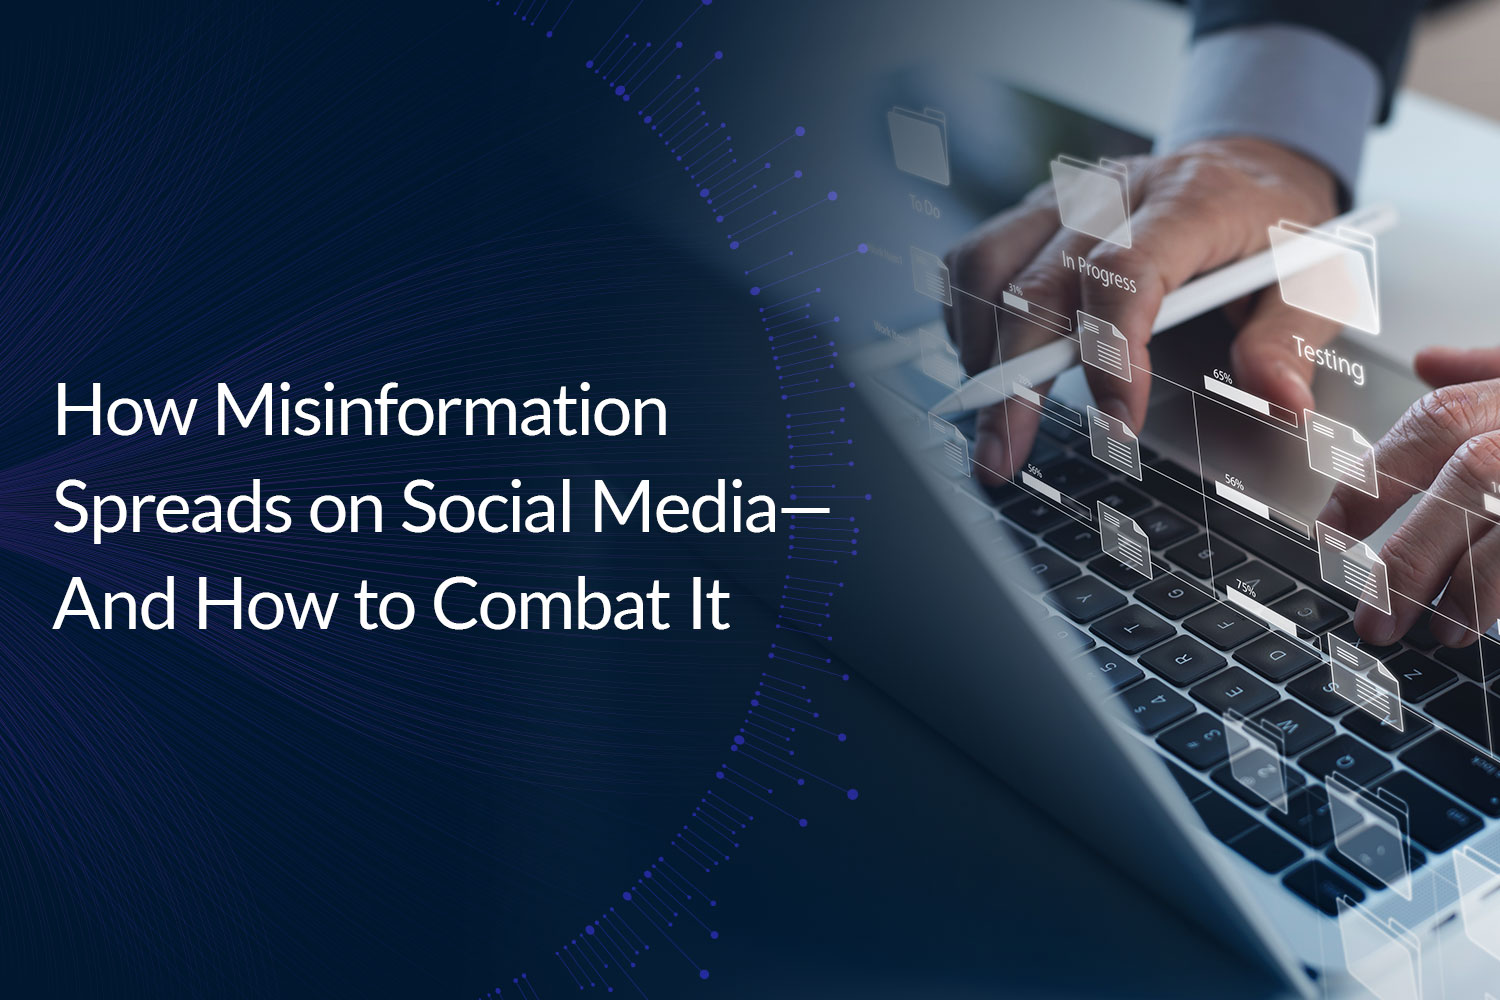 How Misinformation Spreads on Social Media—And How to Combat